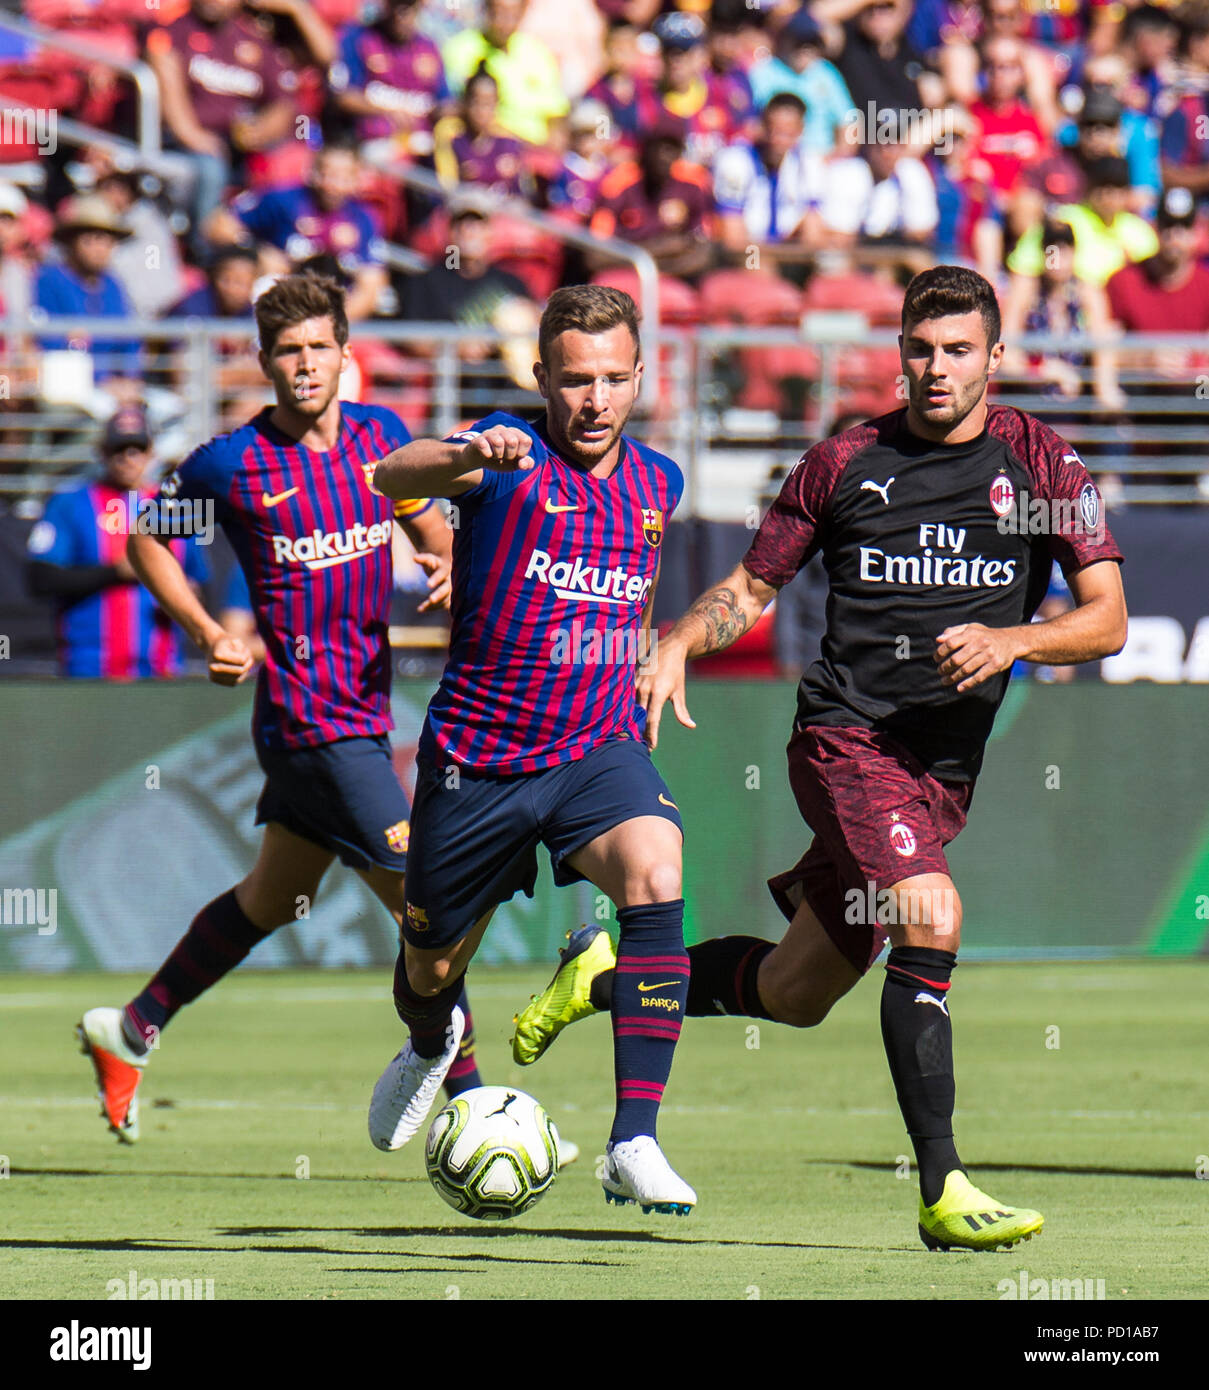 Santa Clara, CA USA. 04th Aug, 2018. FC Barcelona # 4 Arthur Melo protect  the ball at mid field during the international championship cup game  between A.C. Milan and FC Barcelona 0-1